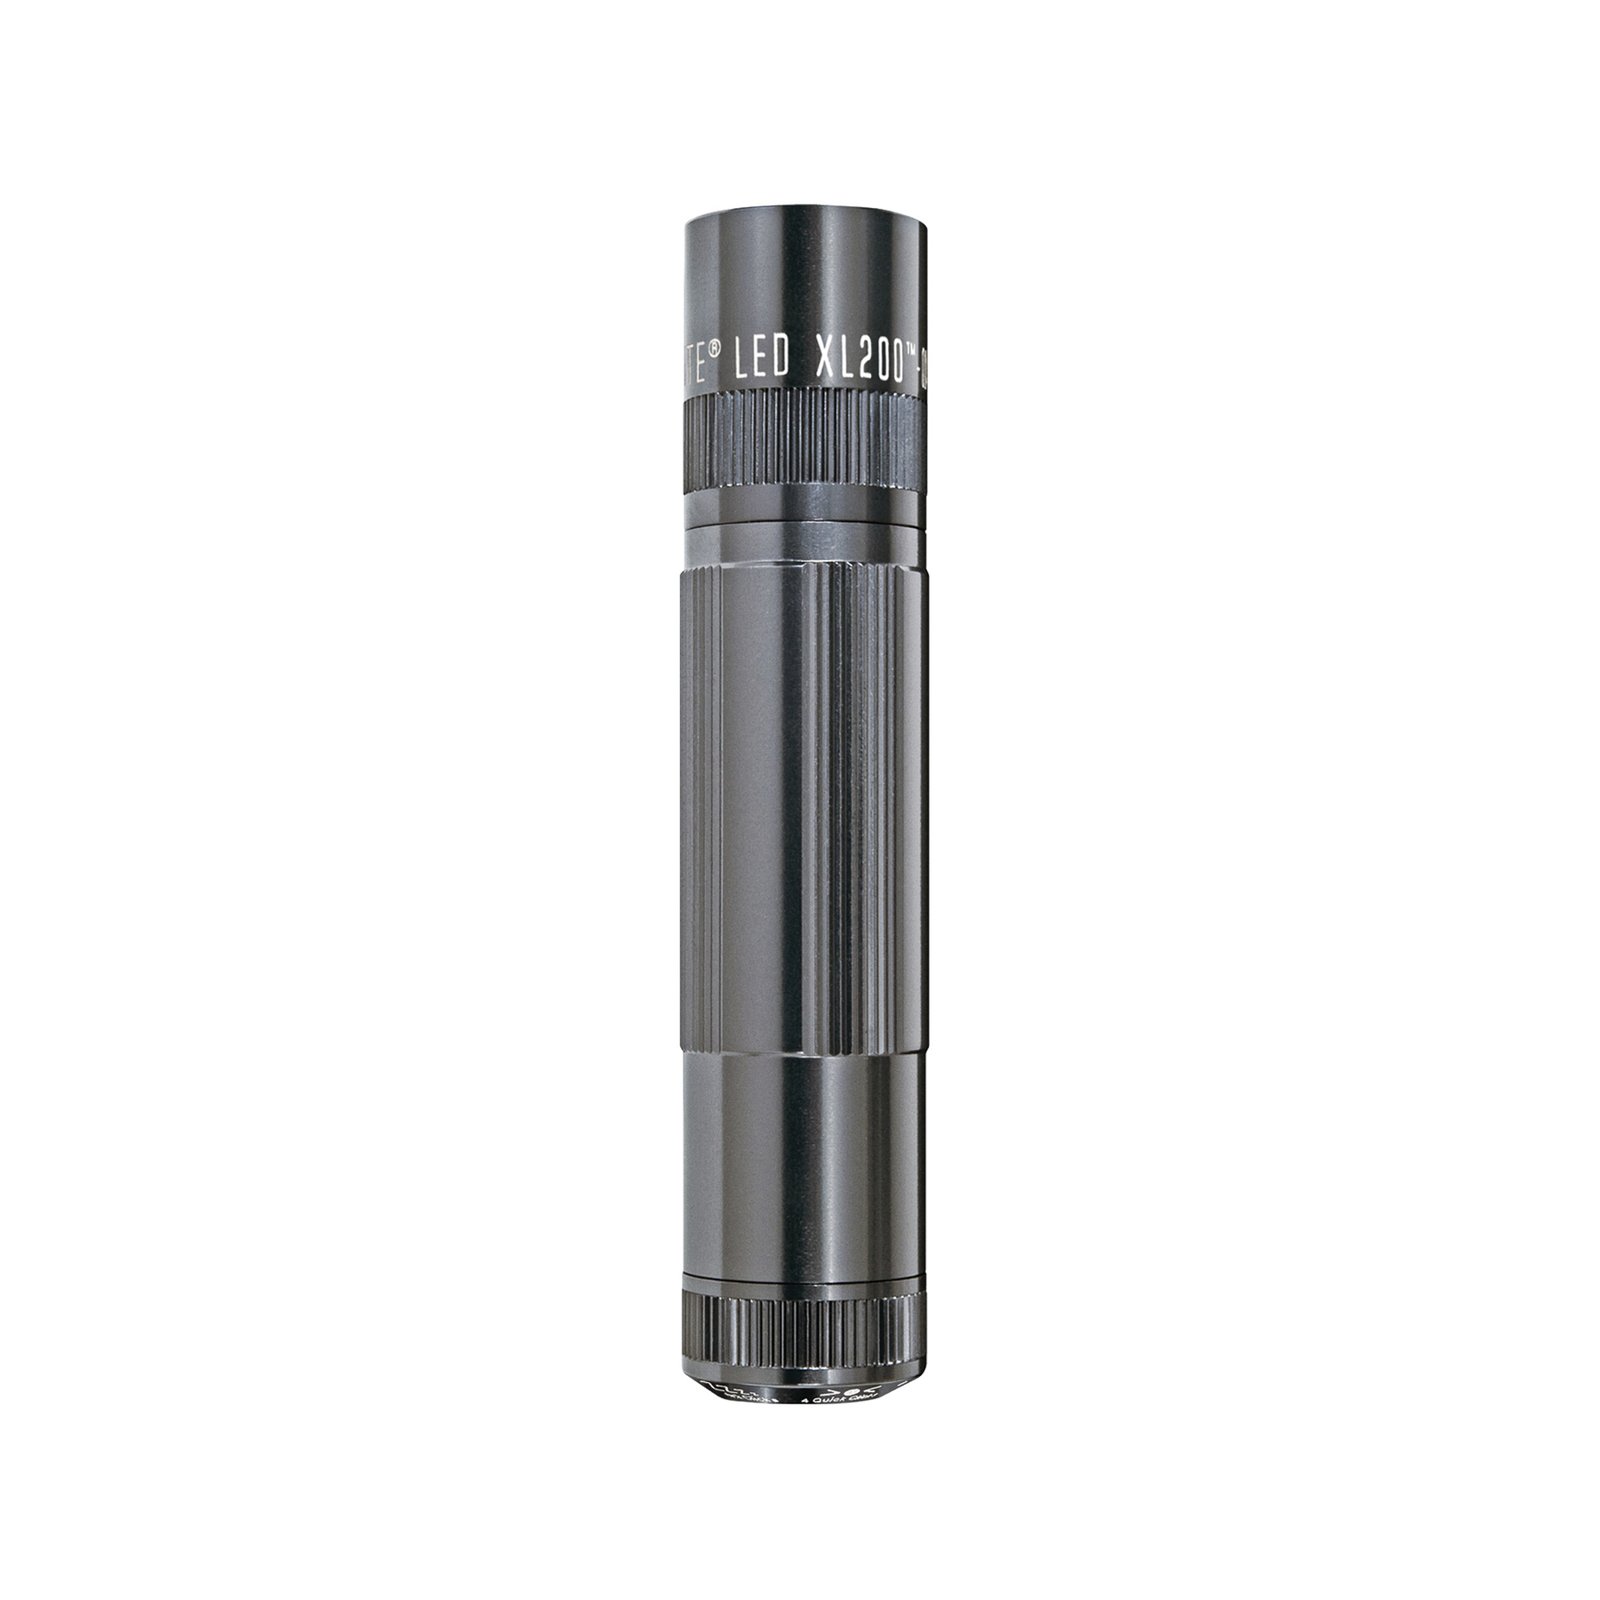 Maglite LED torch XL200, 3-Cell AAA, grey